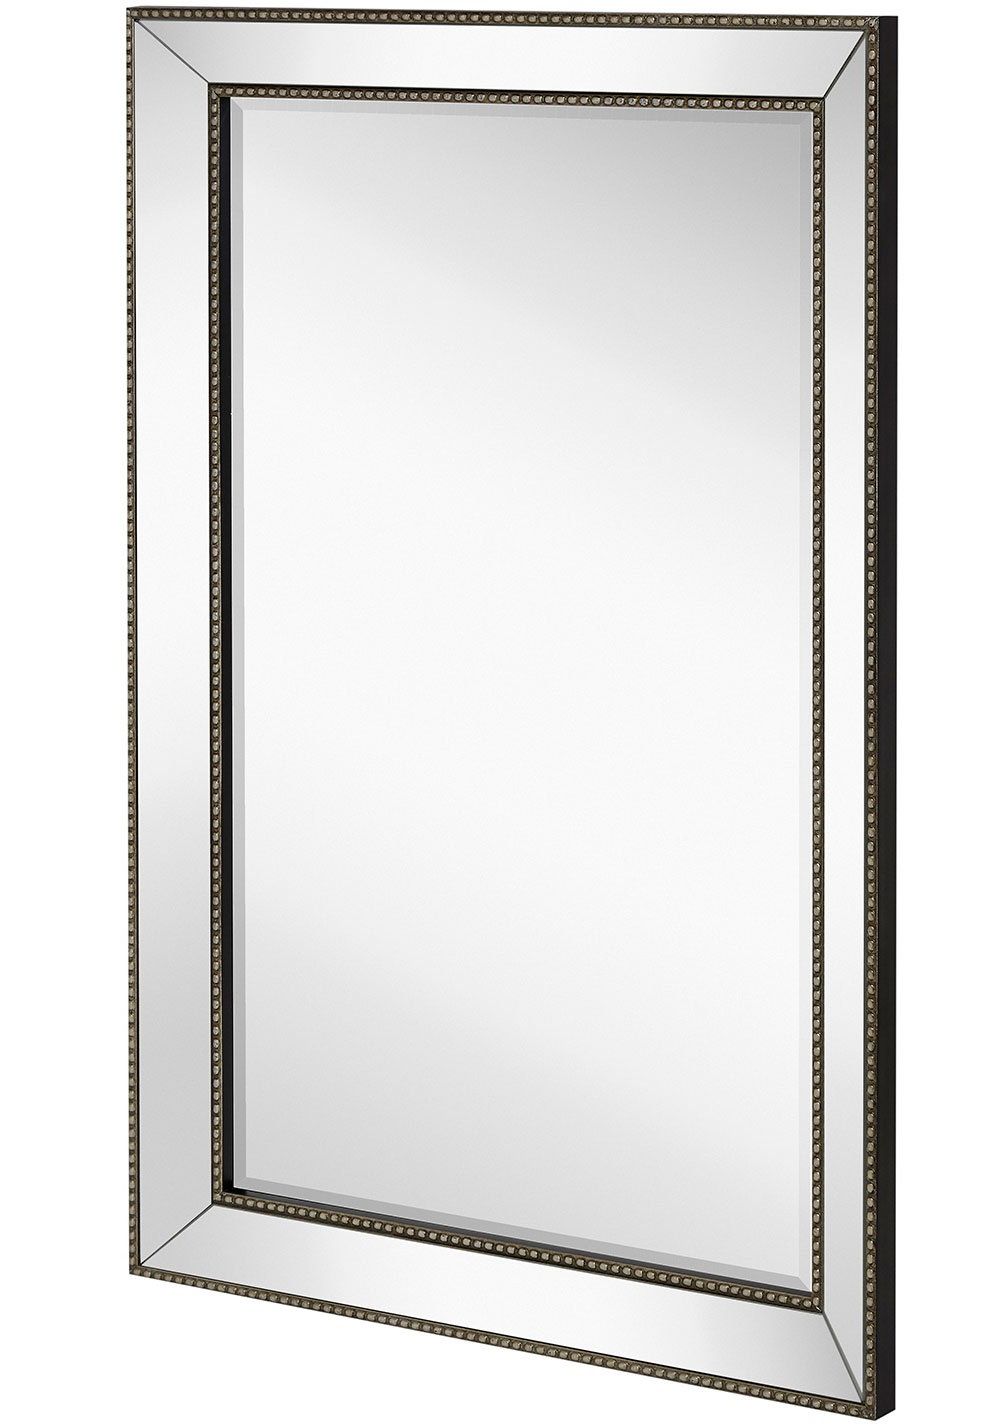 Recent Large Framed Wall Mirror With Angled Beveled Mirror Frame And Beaded Intended For Bevel Edge Rectangular Wall Mirrors (View 13 of 15)